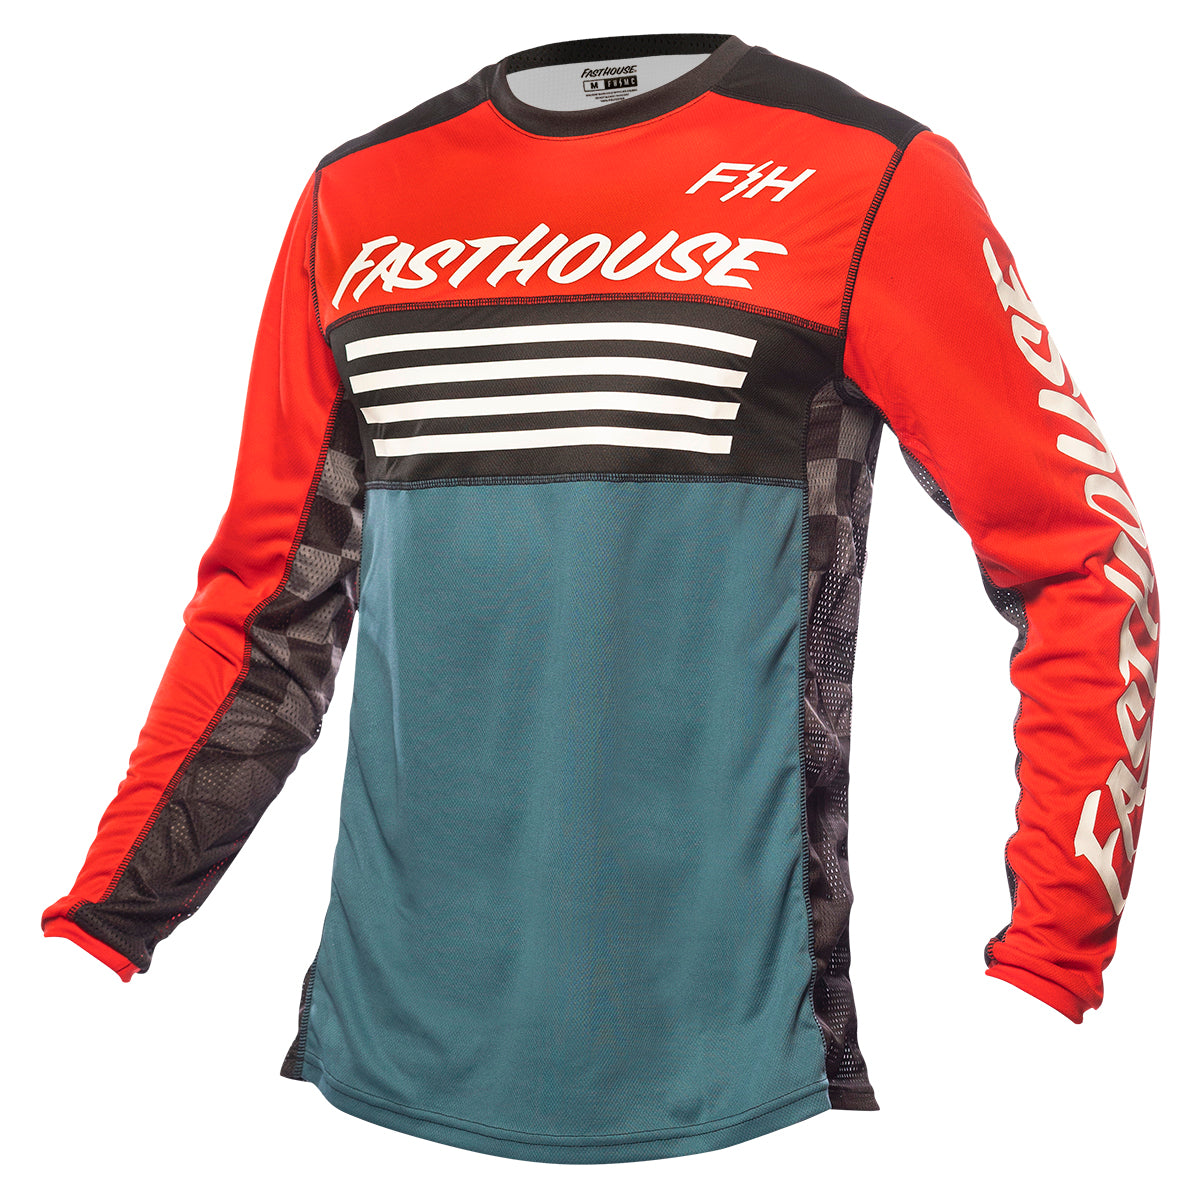 Grindhouse Omega Jersey - Red/White/Blue